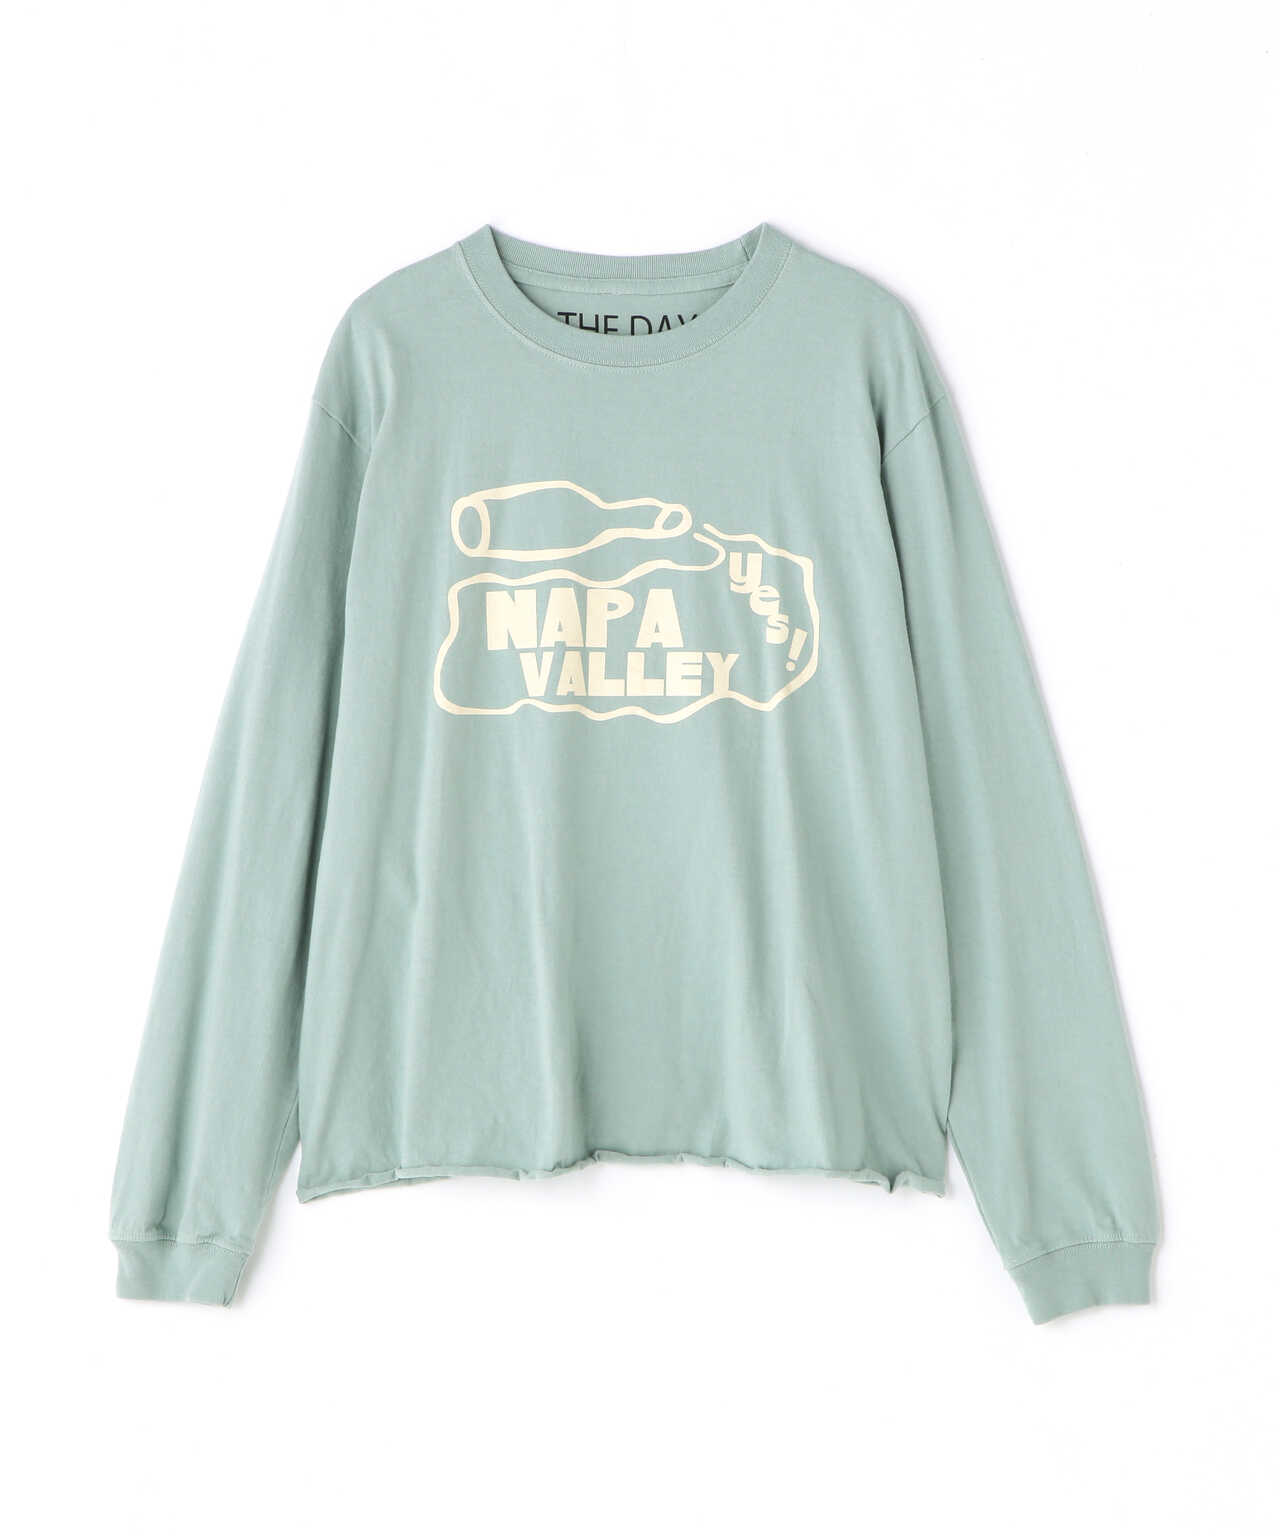 THE DAY ON THE BEACH/ザデイオンザビーチ CUT OFF L/S TEE NAPA ...